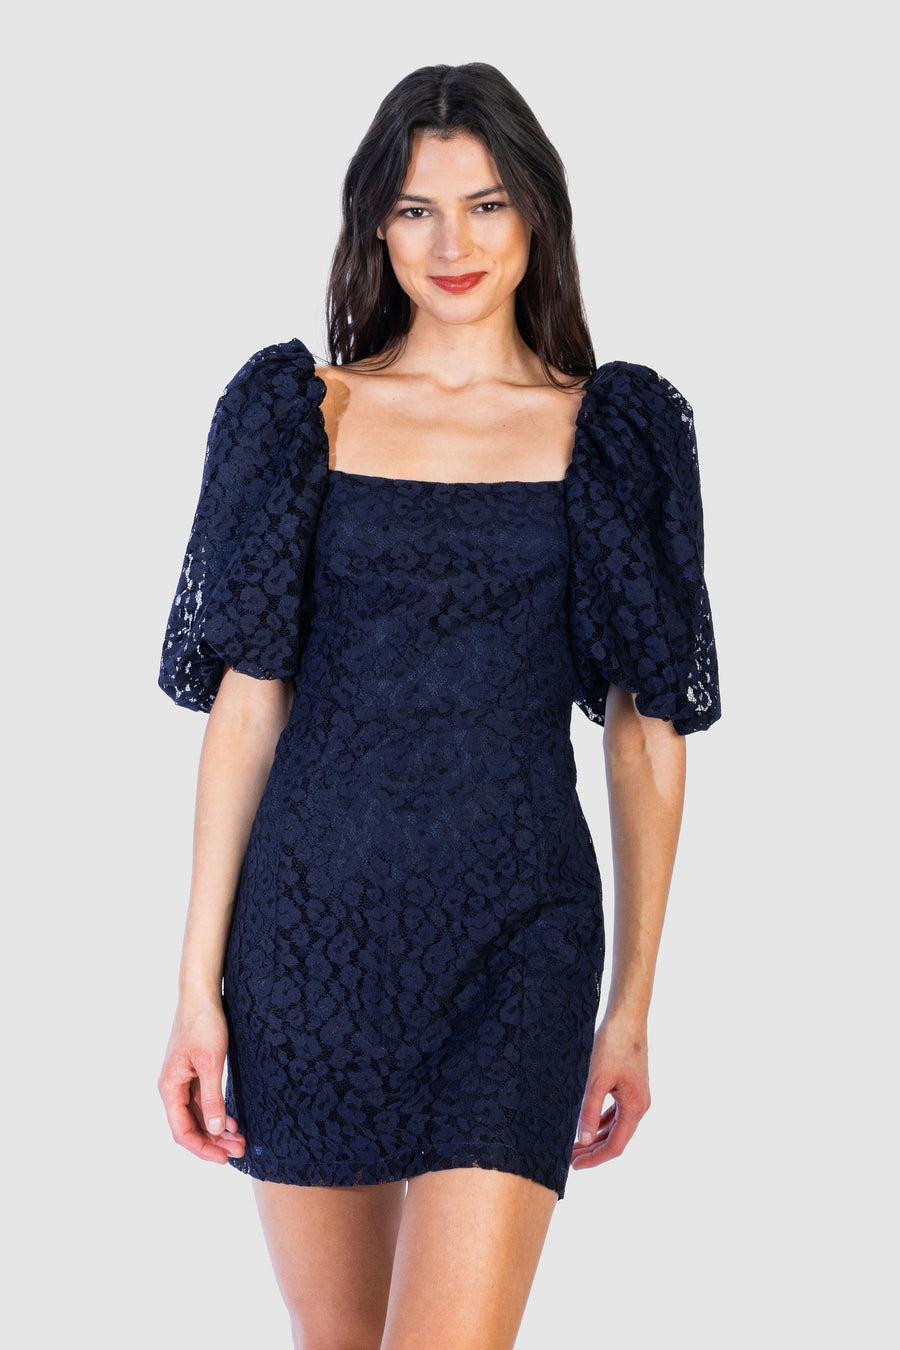 Chloe Dress Midnight Lace *Limited*Edition*